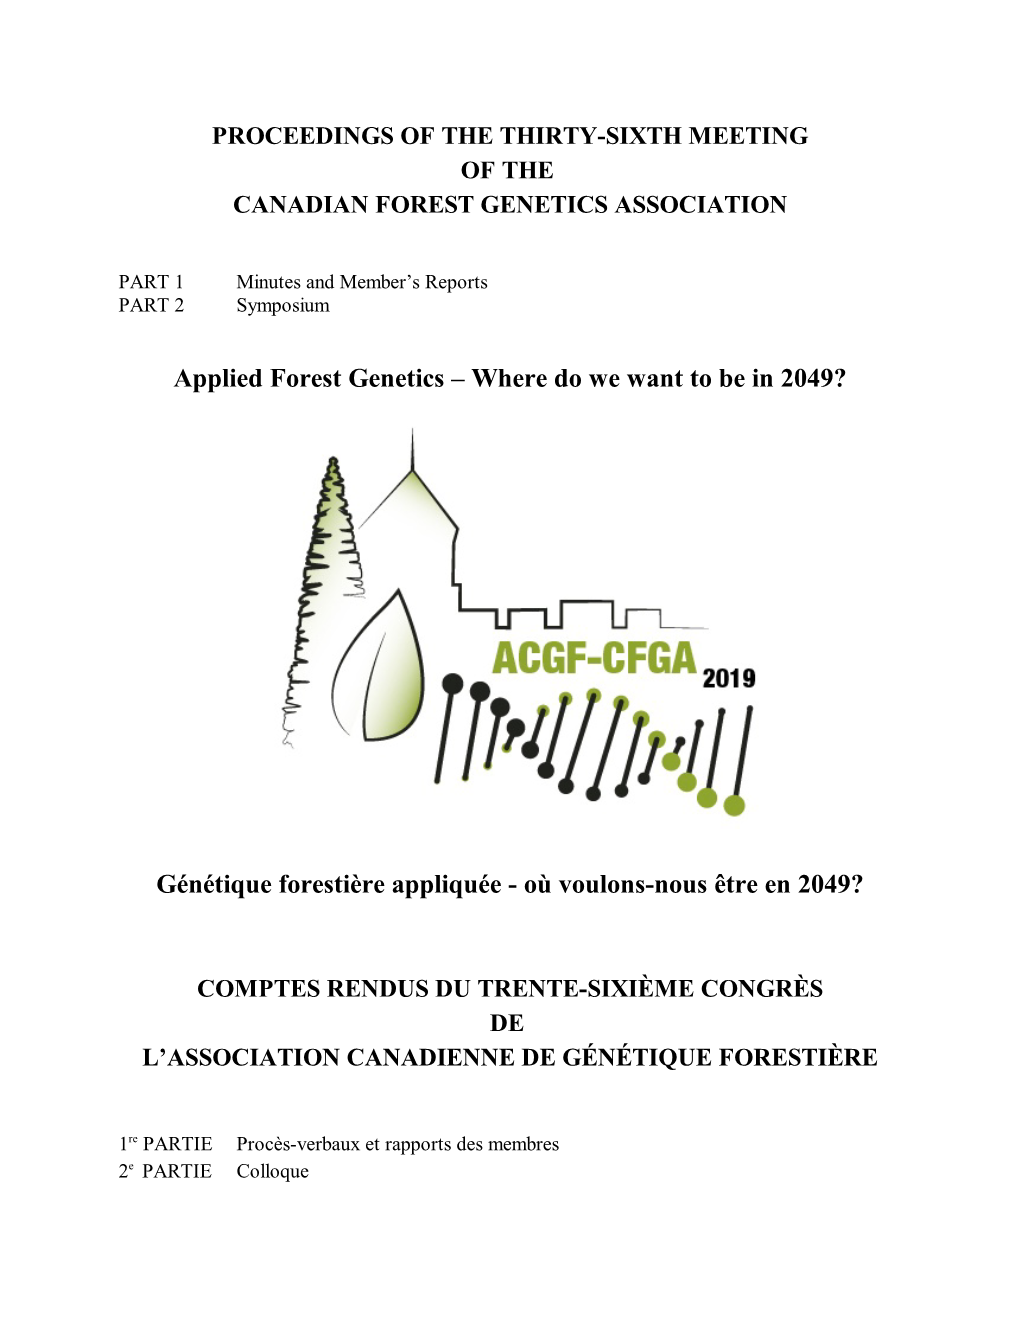 Proceedings of the Thirty-Sixth Meeting of the Canadian Forest Genetics Association